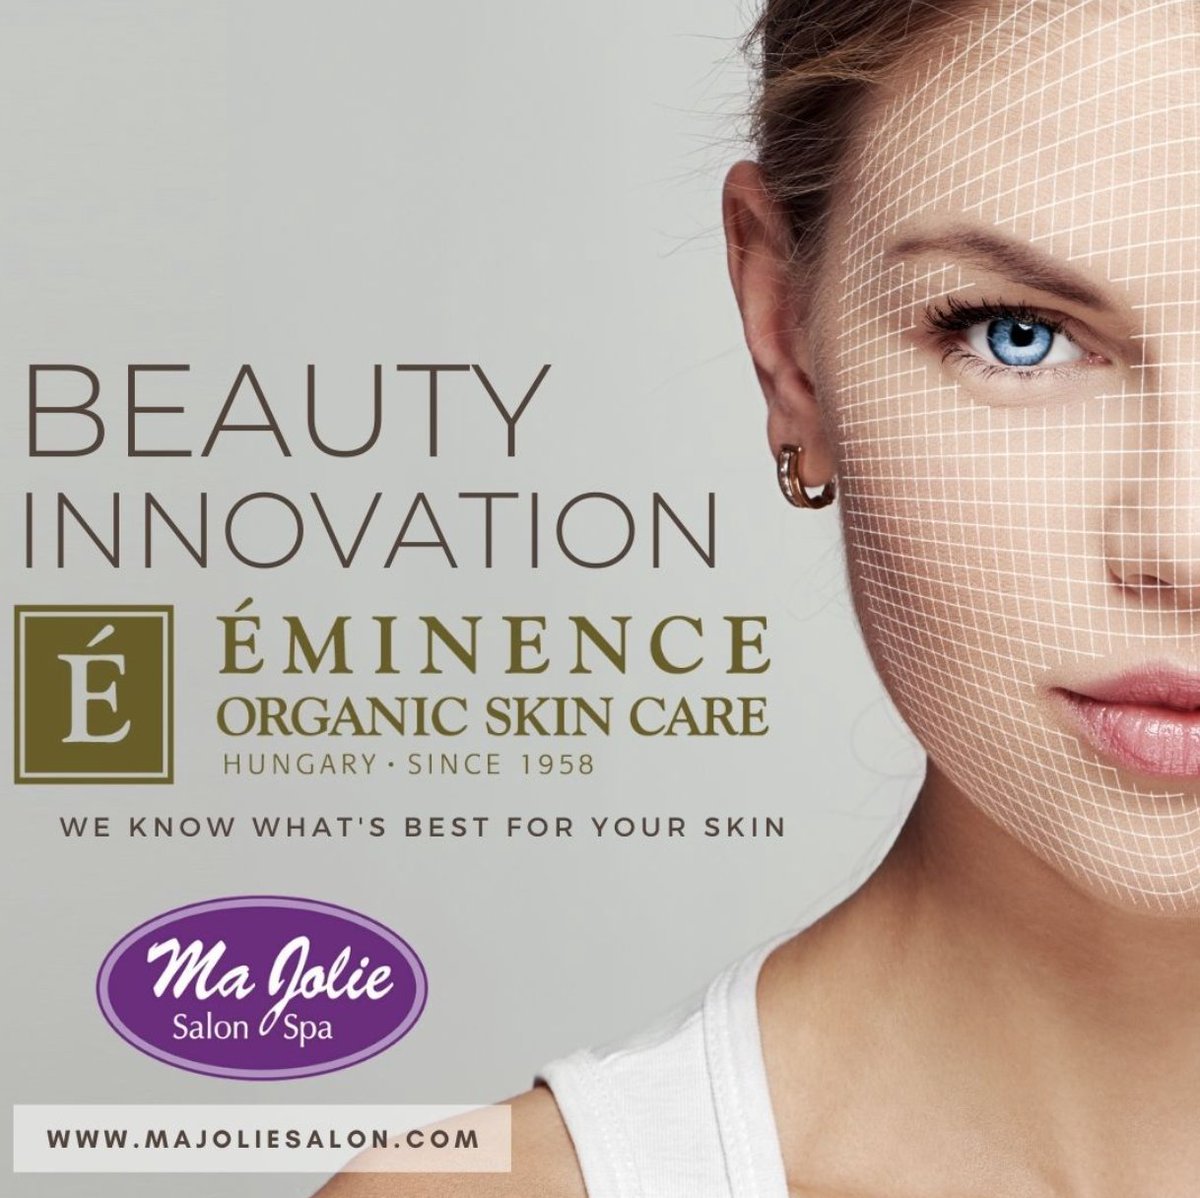 Pamper your skin with the best in Eminence Organic skincare products. Various facials are available that will best suit your skin's needs. Schedule your appointment at 925-837-2060

#facialspa #facials #spa #bestinthebay #facialmasks #eminence #eminenceorganics